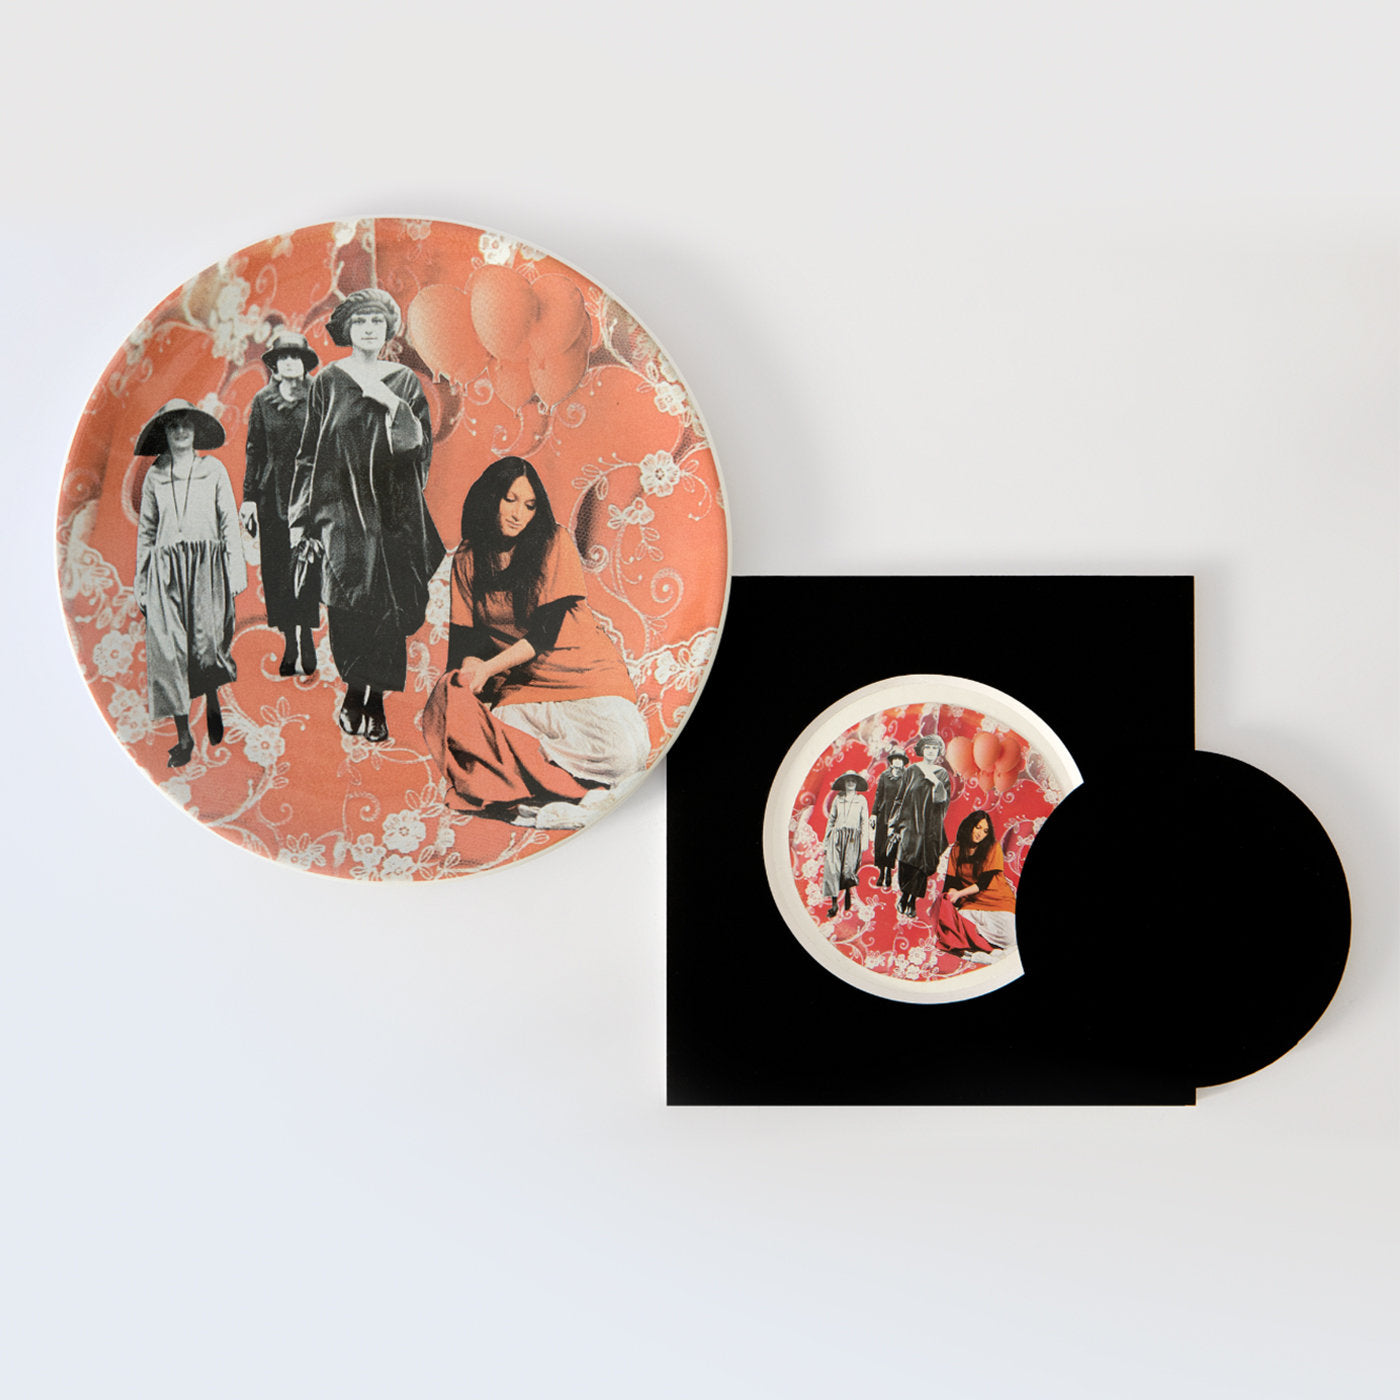 Oh Women! Decorative Plate #2 Limited Edition - Alternative view 3